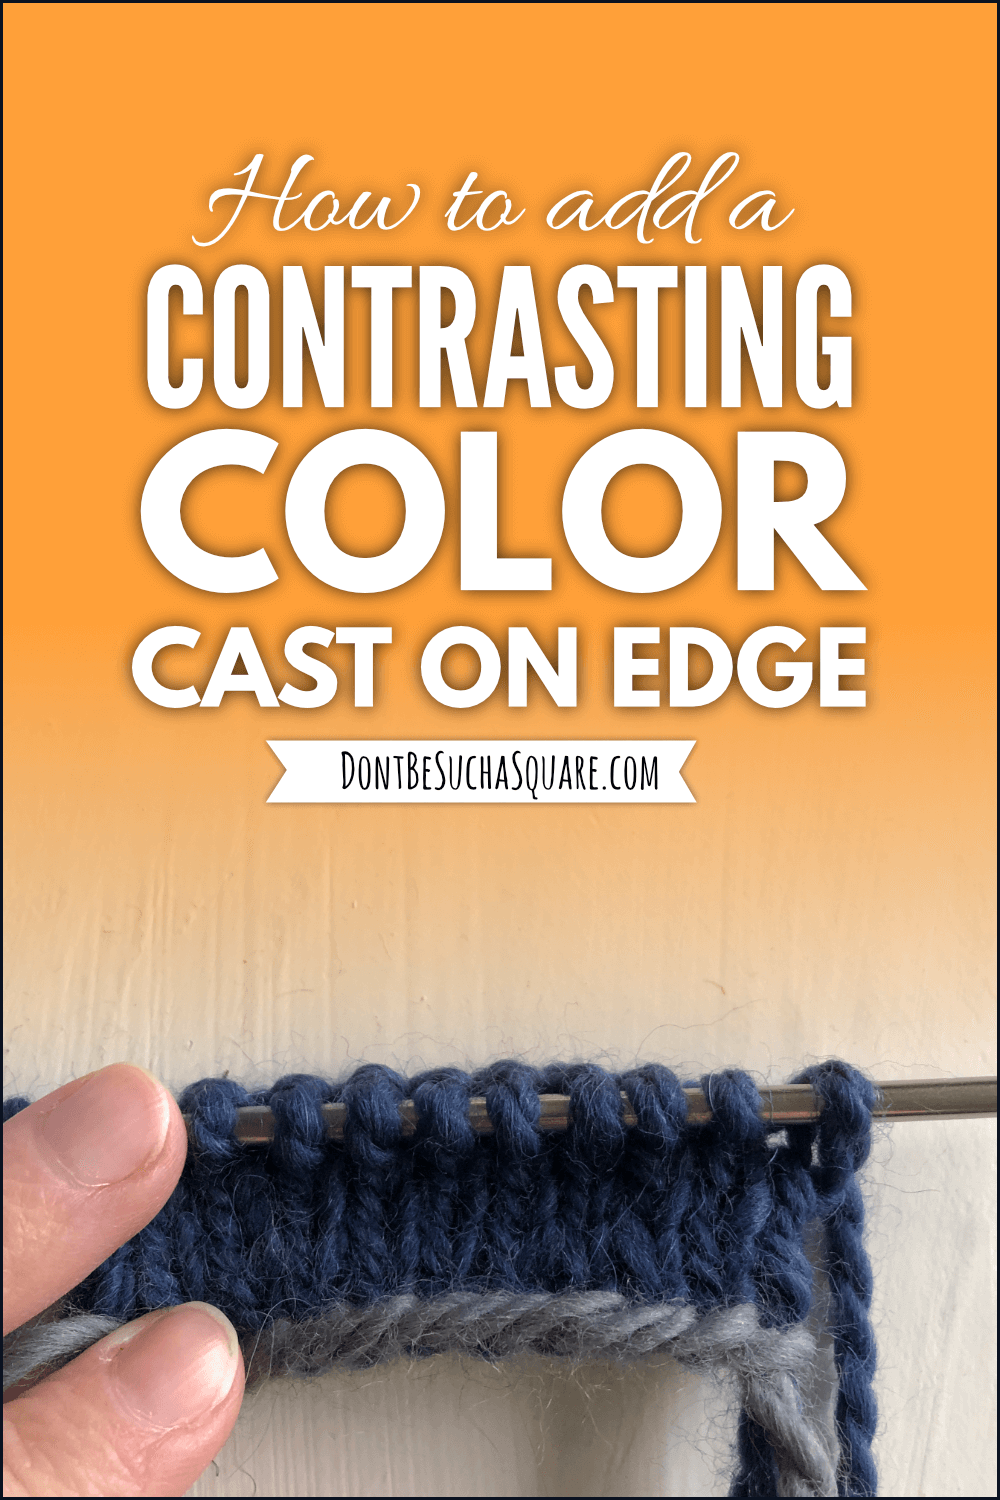 How to ad a contrasting cast on edge to your knitting